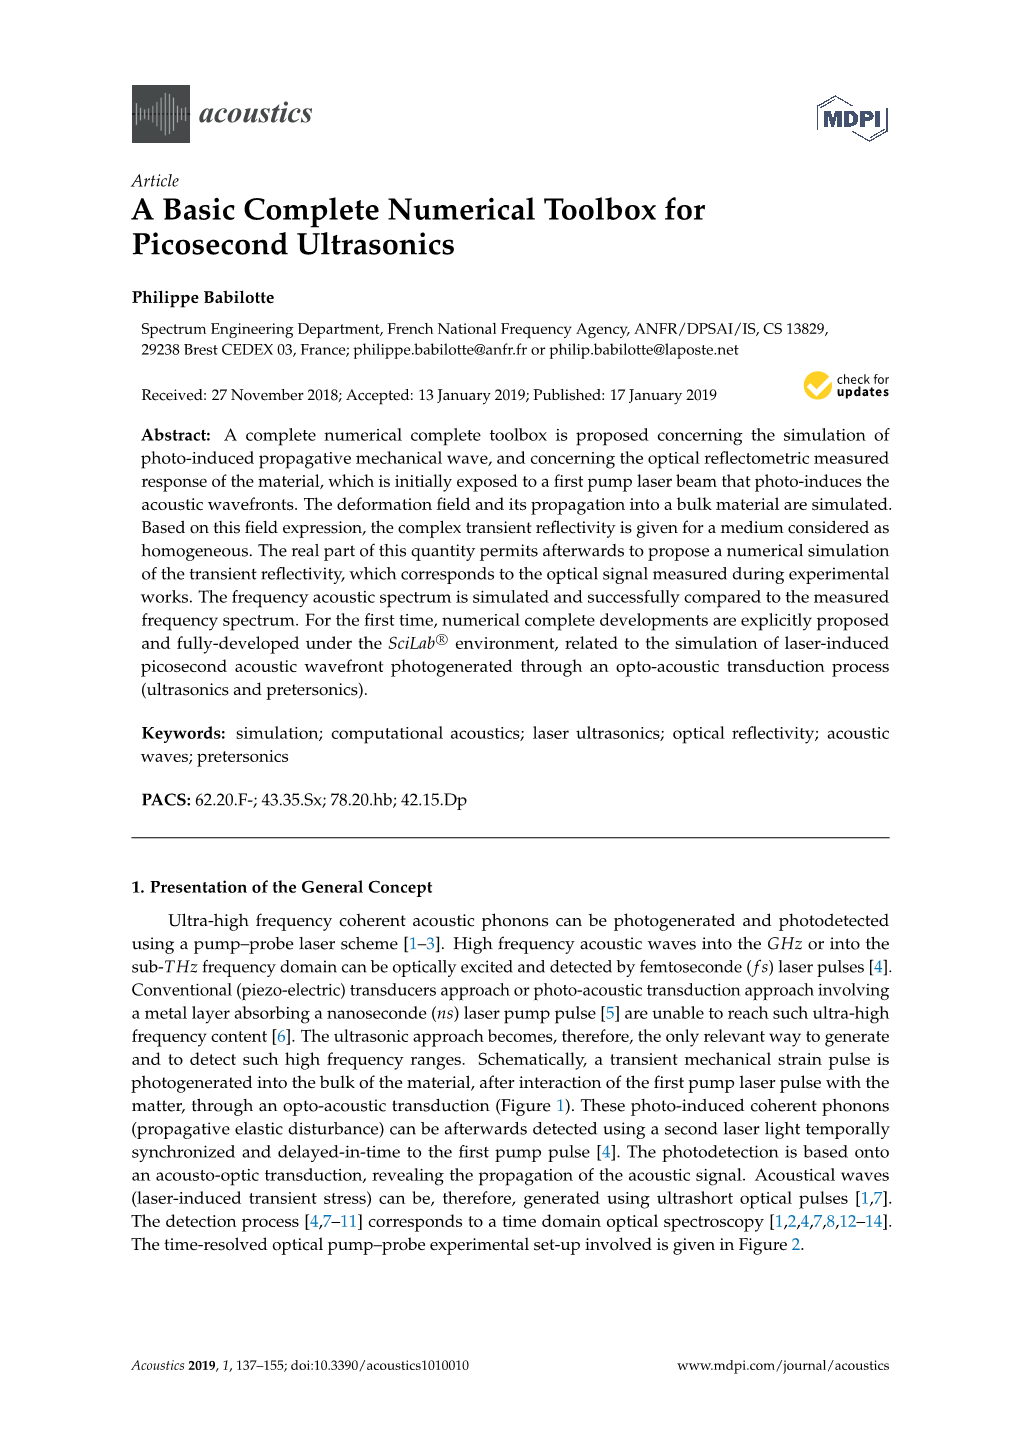 A Basic Complete Numerical Toolbox for Picosecond Ultrasonics